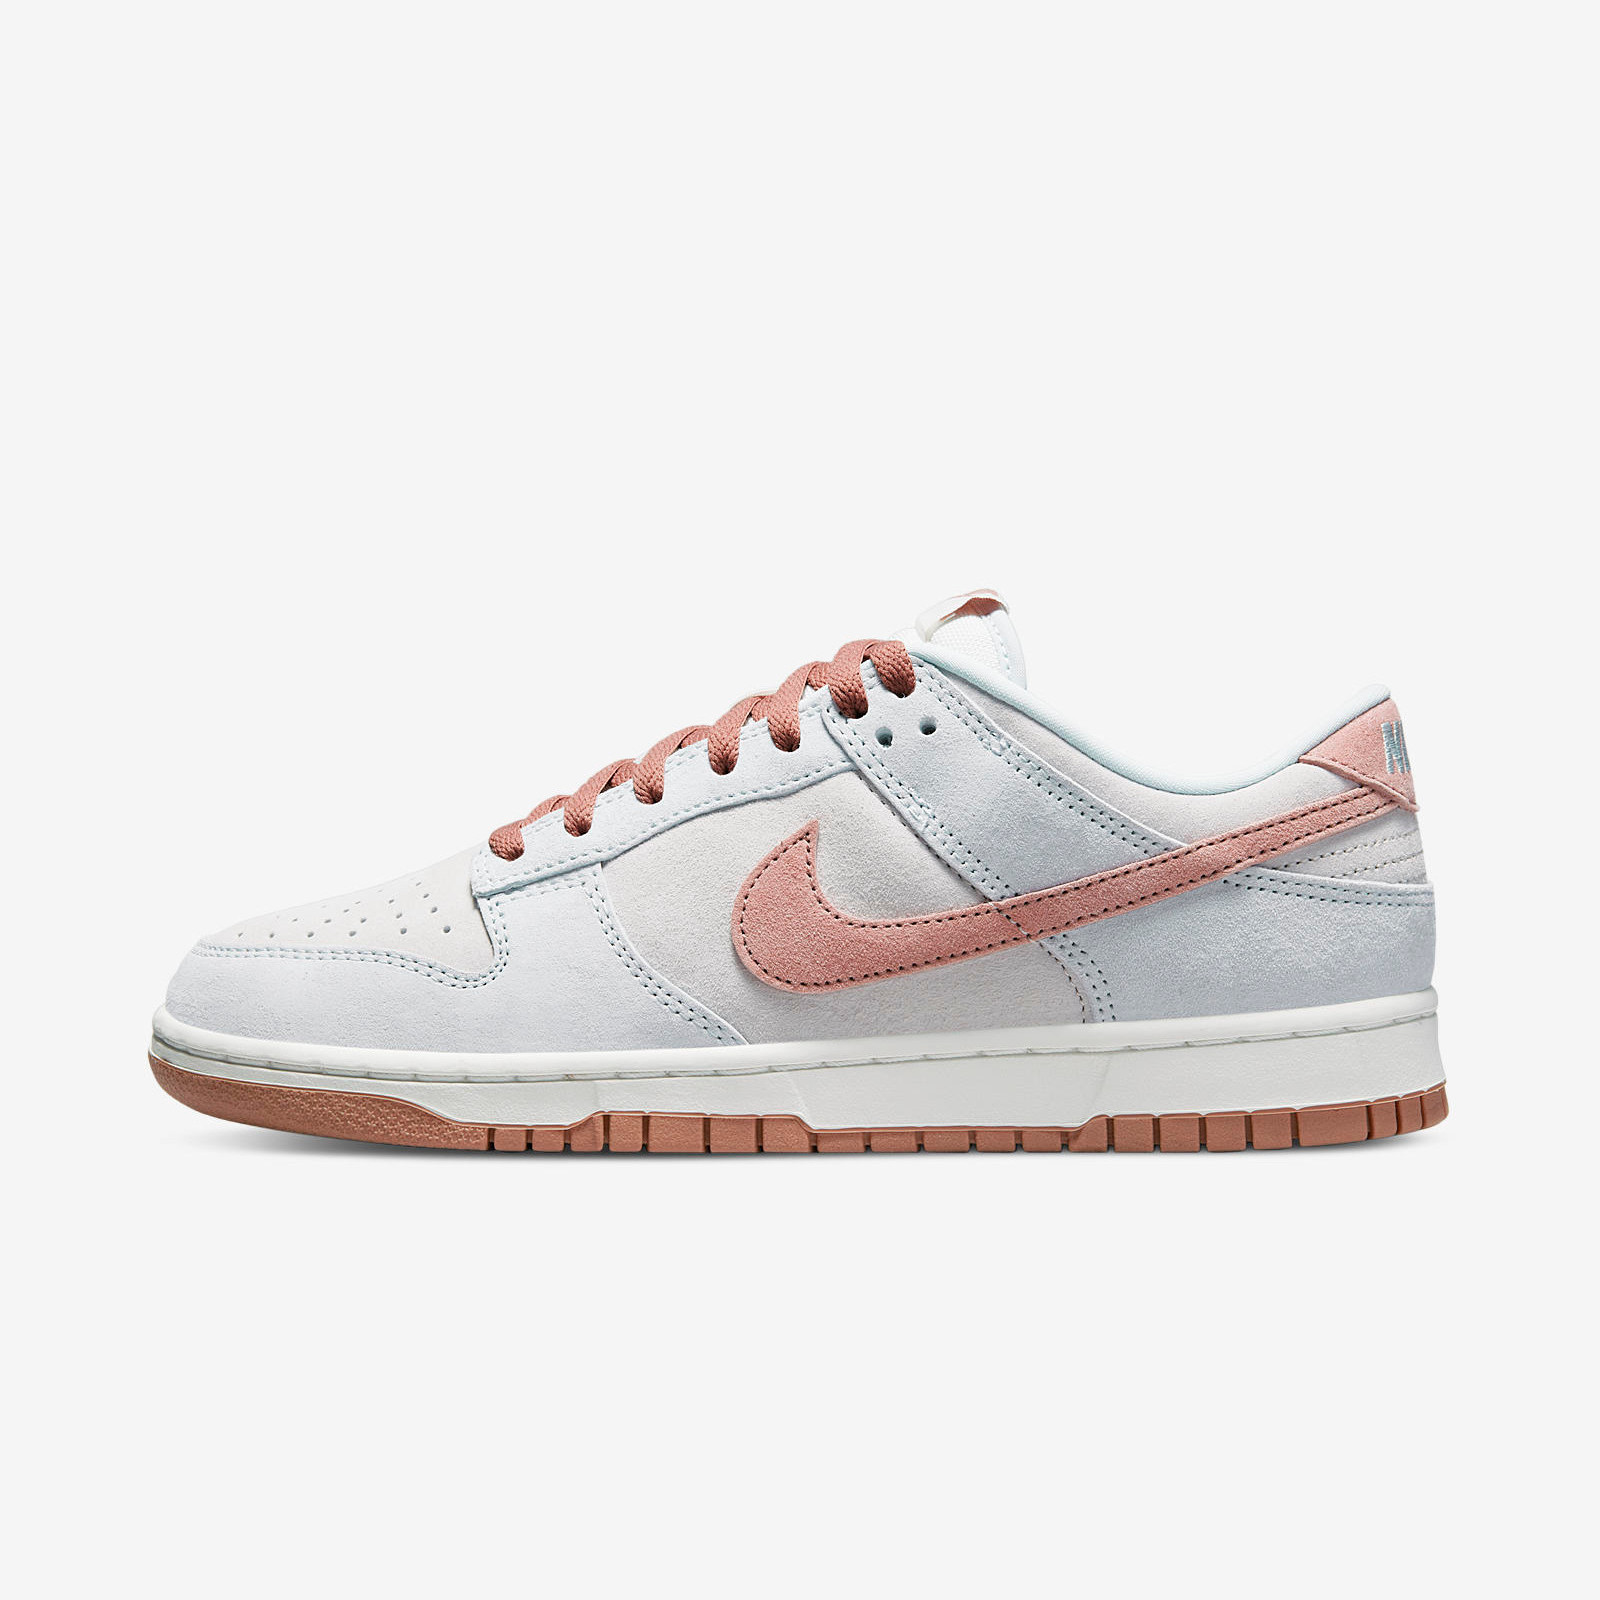 Nike Dunk Low
« Fossil Rose »